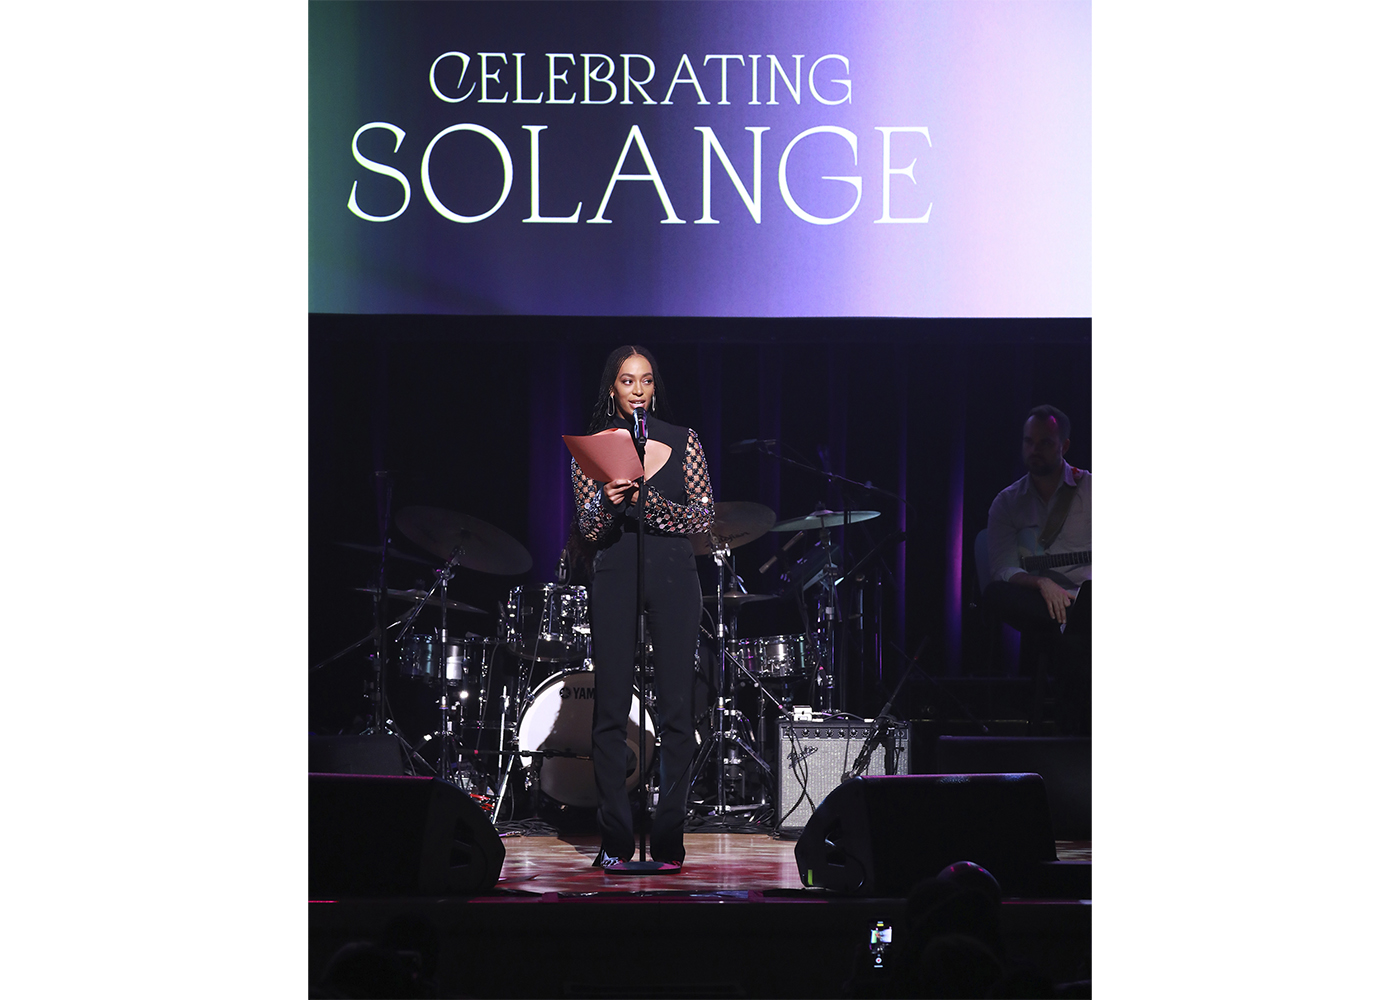 Solange Knowles speaks onstage at the Lena Horne Prize Event Honoring Solange Knowles Presented by Salesforce at the Town Hall on February 28, 2020, in New York City (photo by Jason Mendez/Getty Images for the Town Hall)